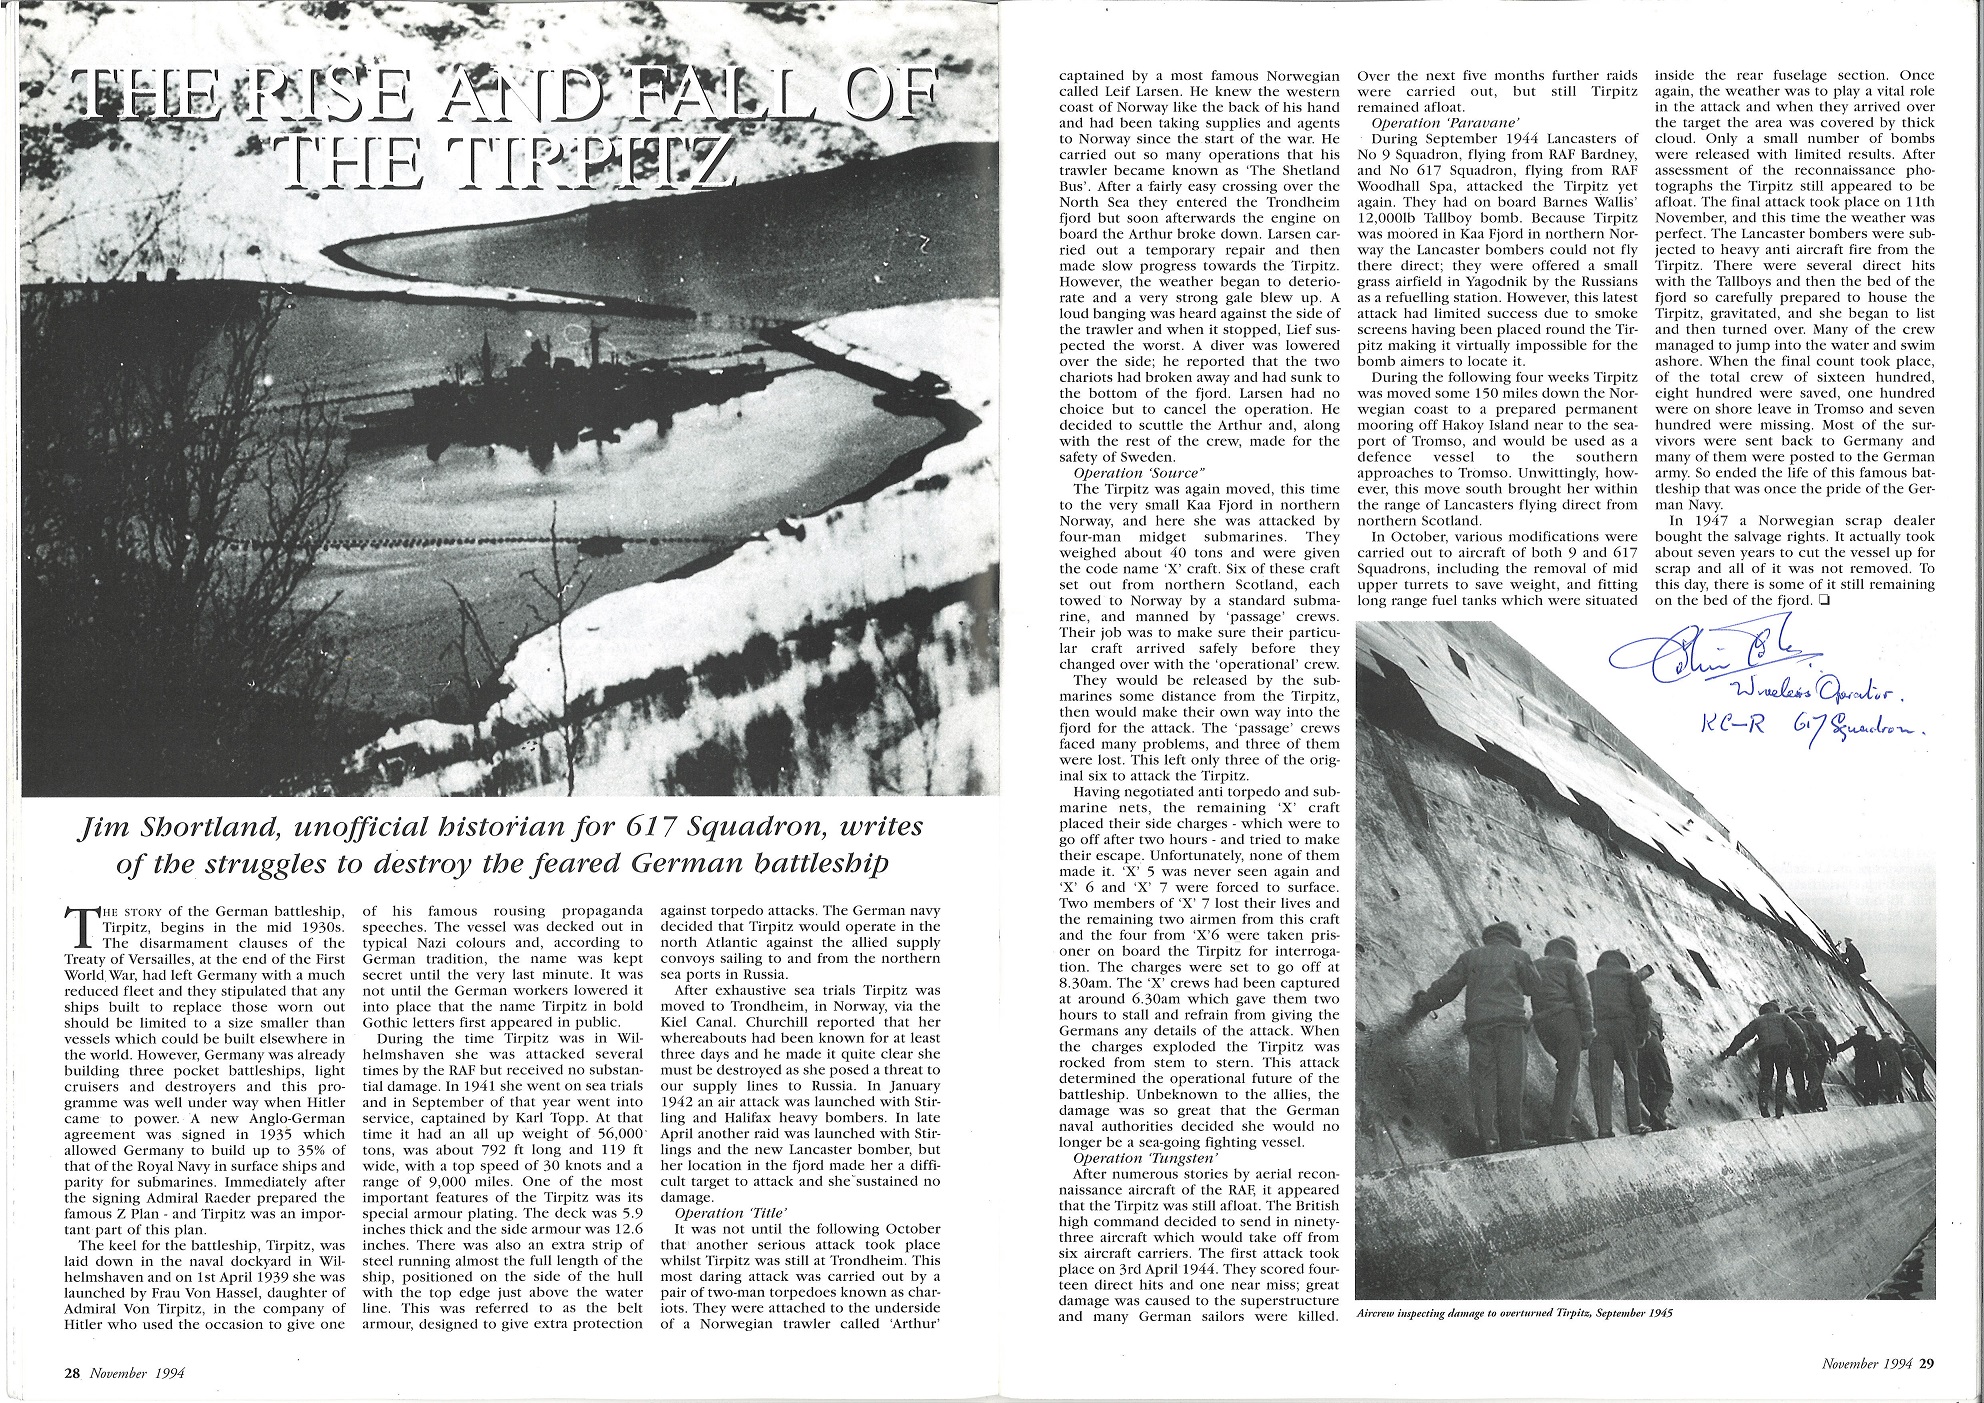 WW2 Tirpitz Raid signed collection of letters, press articles and other ephemera from Jim - Image 5 of 5